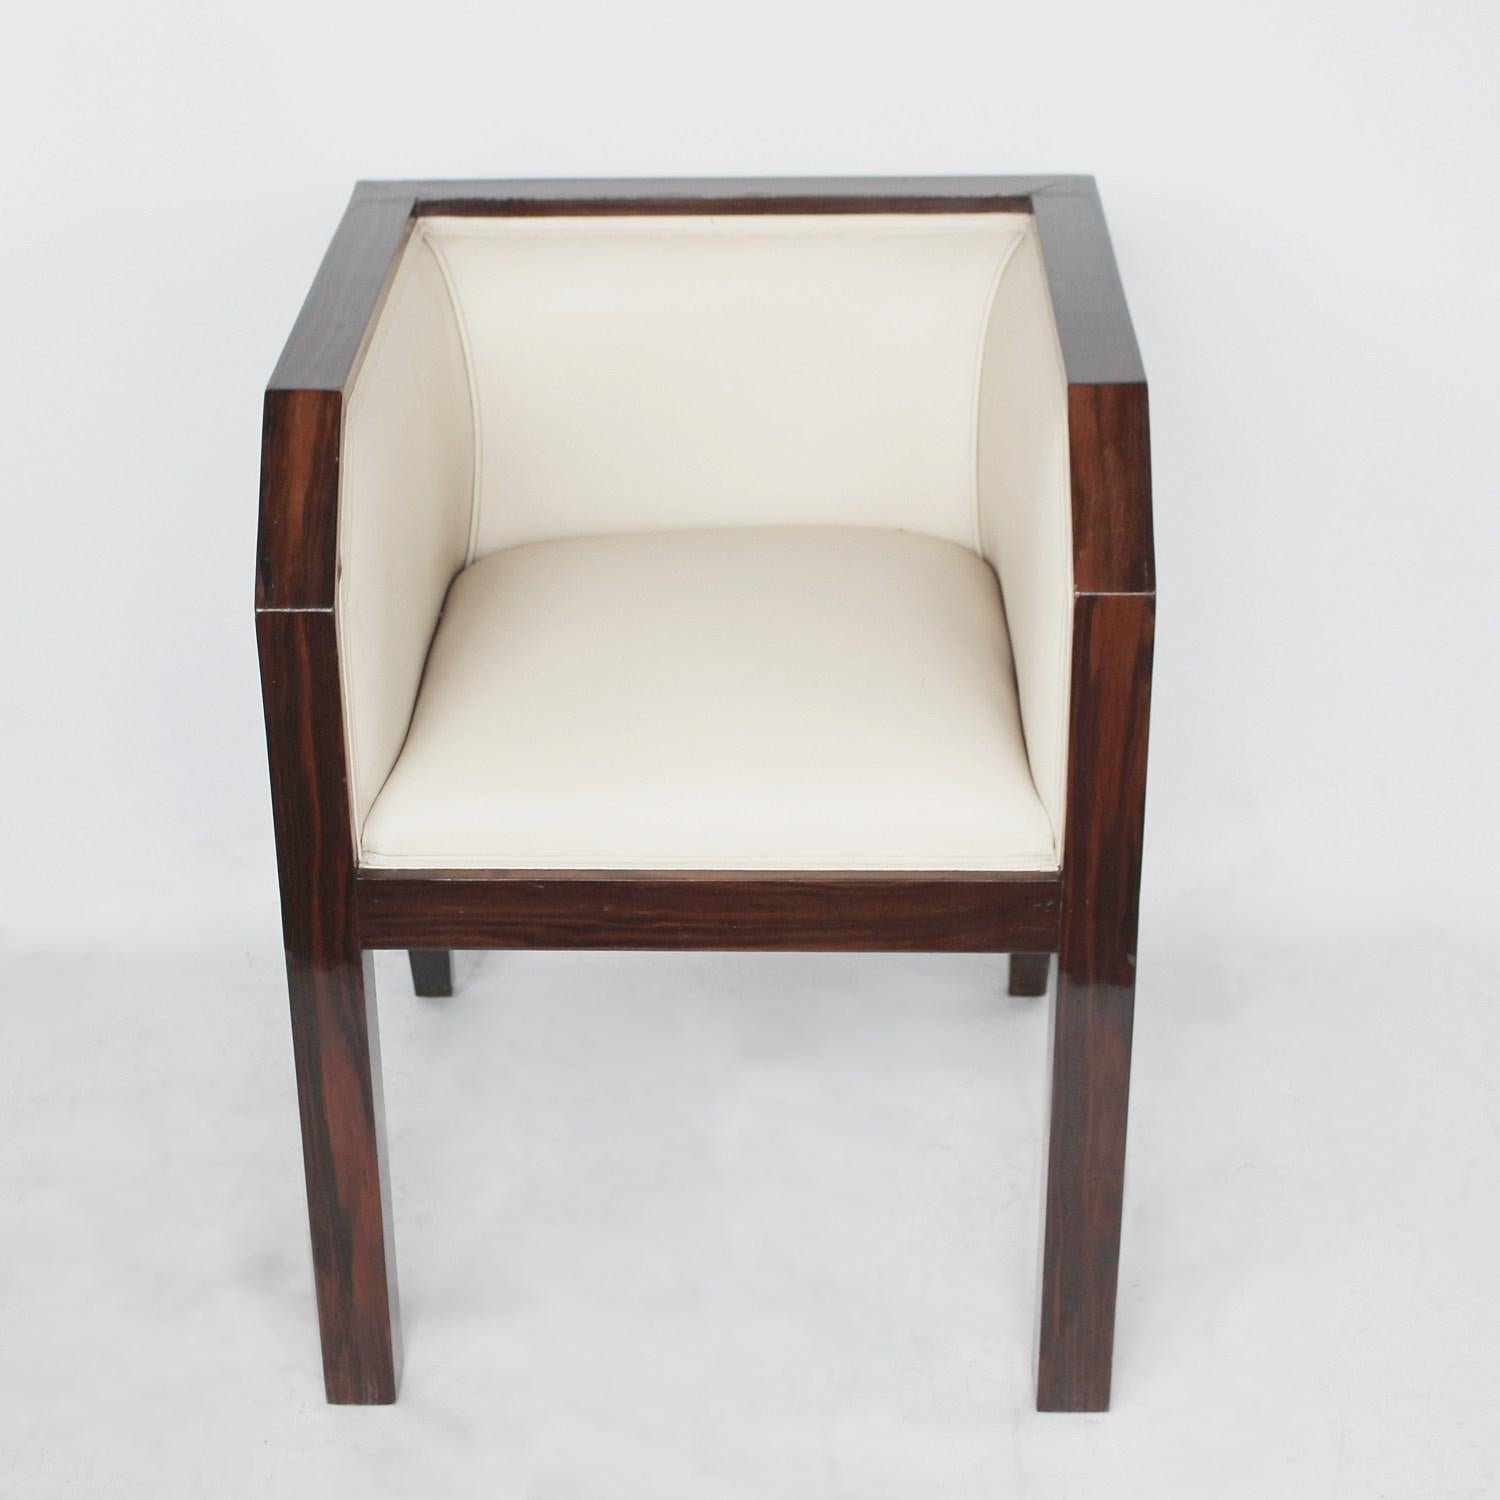 An Art Deco side chair in the modernist style. Figured Macassar ebony surround. Upholstered in cream leather.

Dimensions: H 72cm, W 55cm, D 60cm, seat H 48cm, seat D 50cm.

 